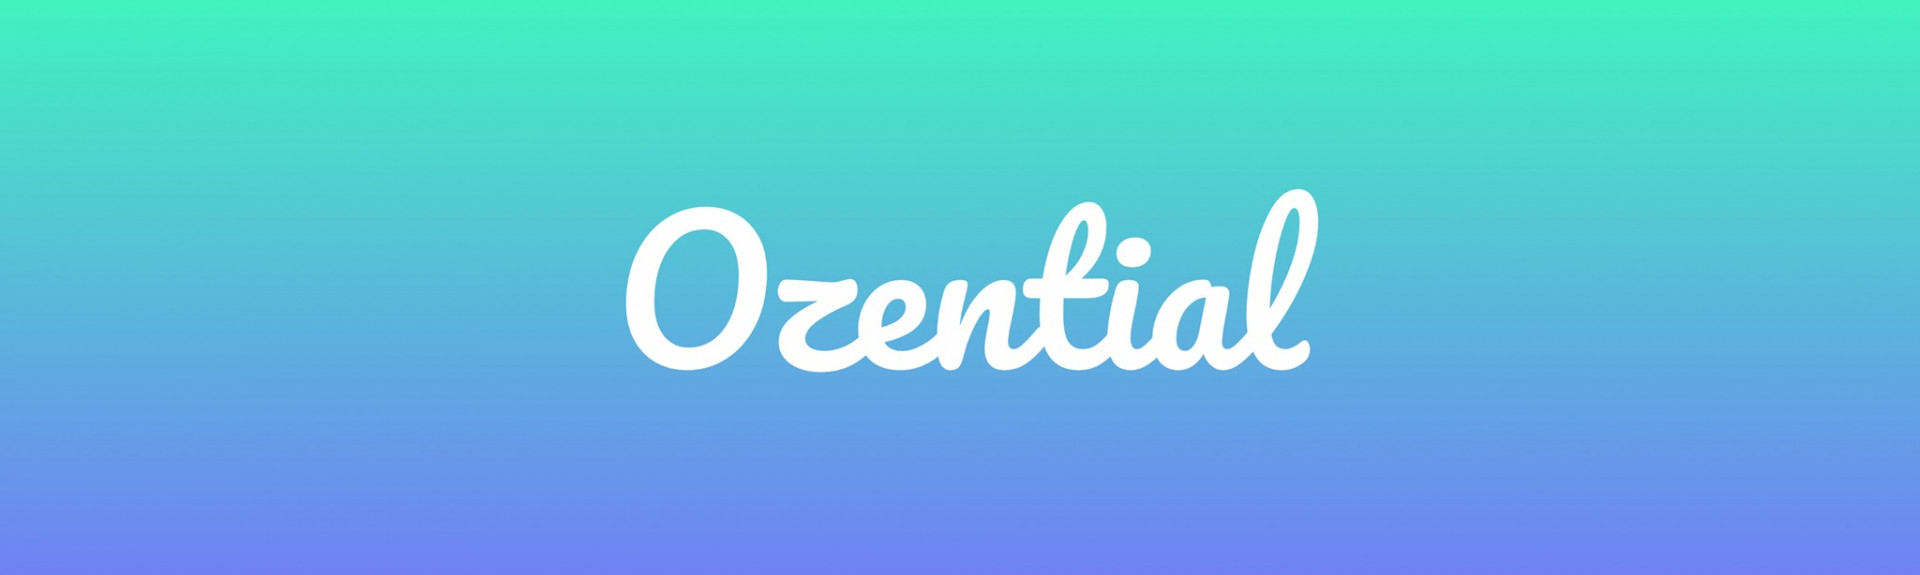 Ozential